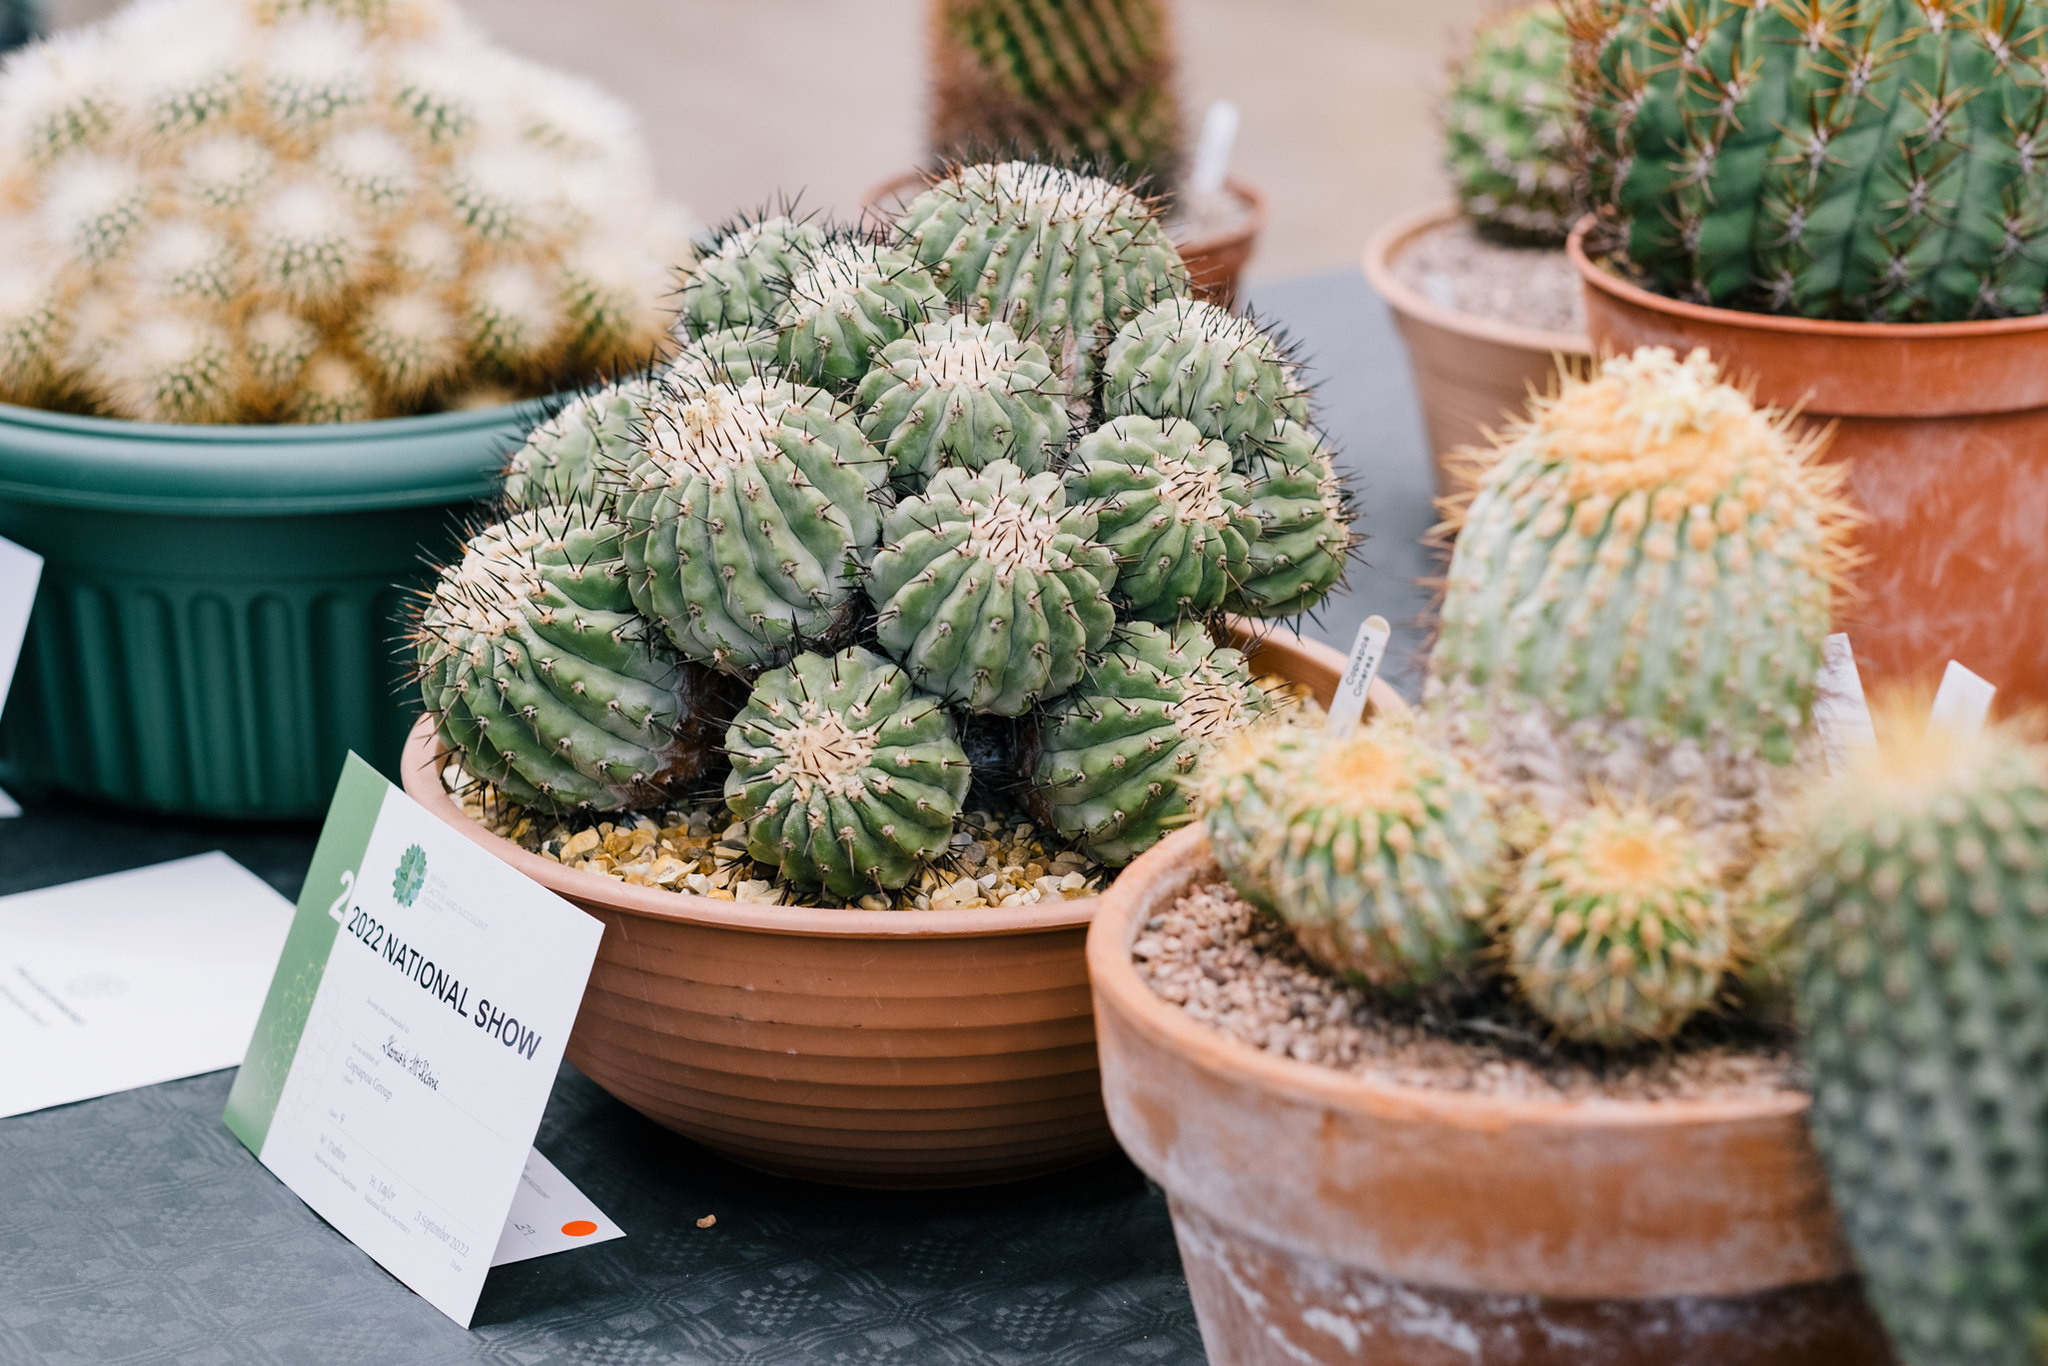 The National Show: Cactus World Live